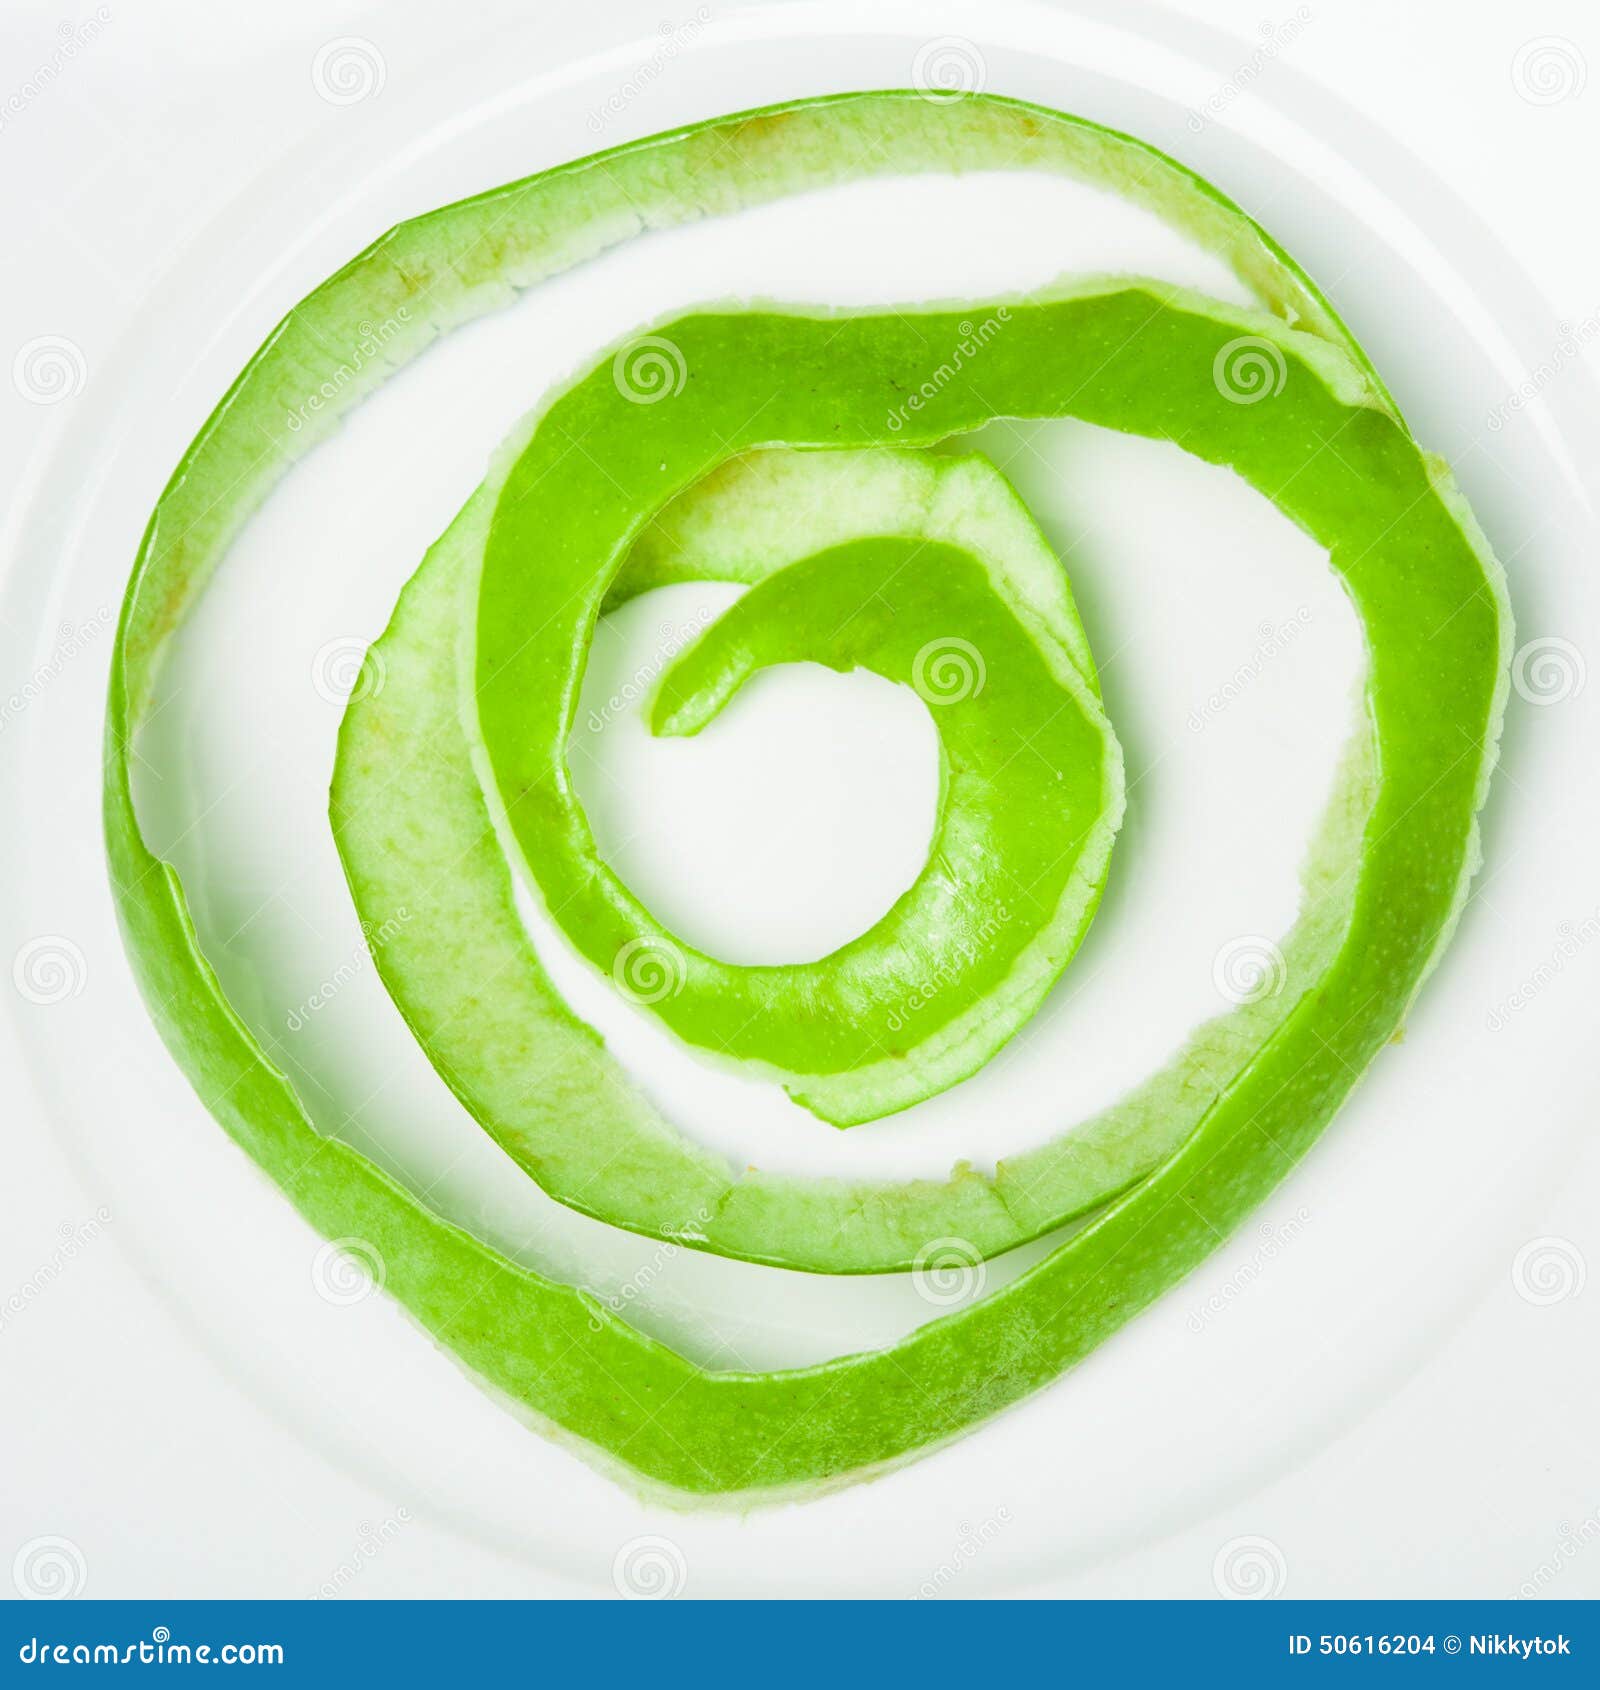 135 Apple Peel Spiral Photos - Free & Royalty-Free Stock from